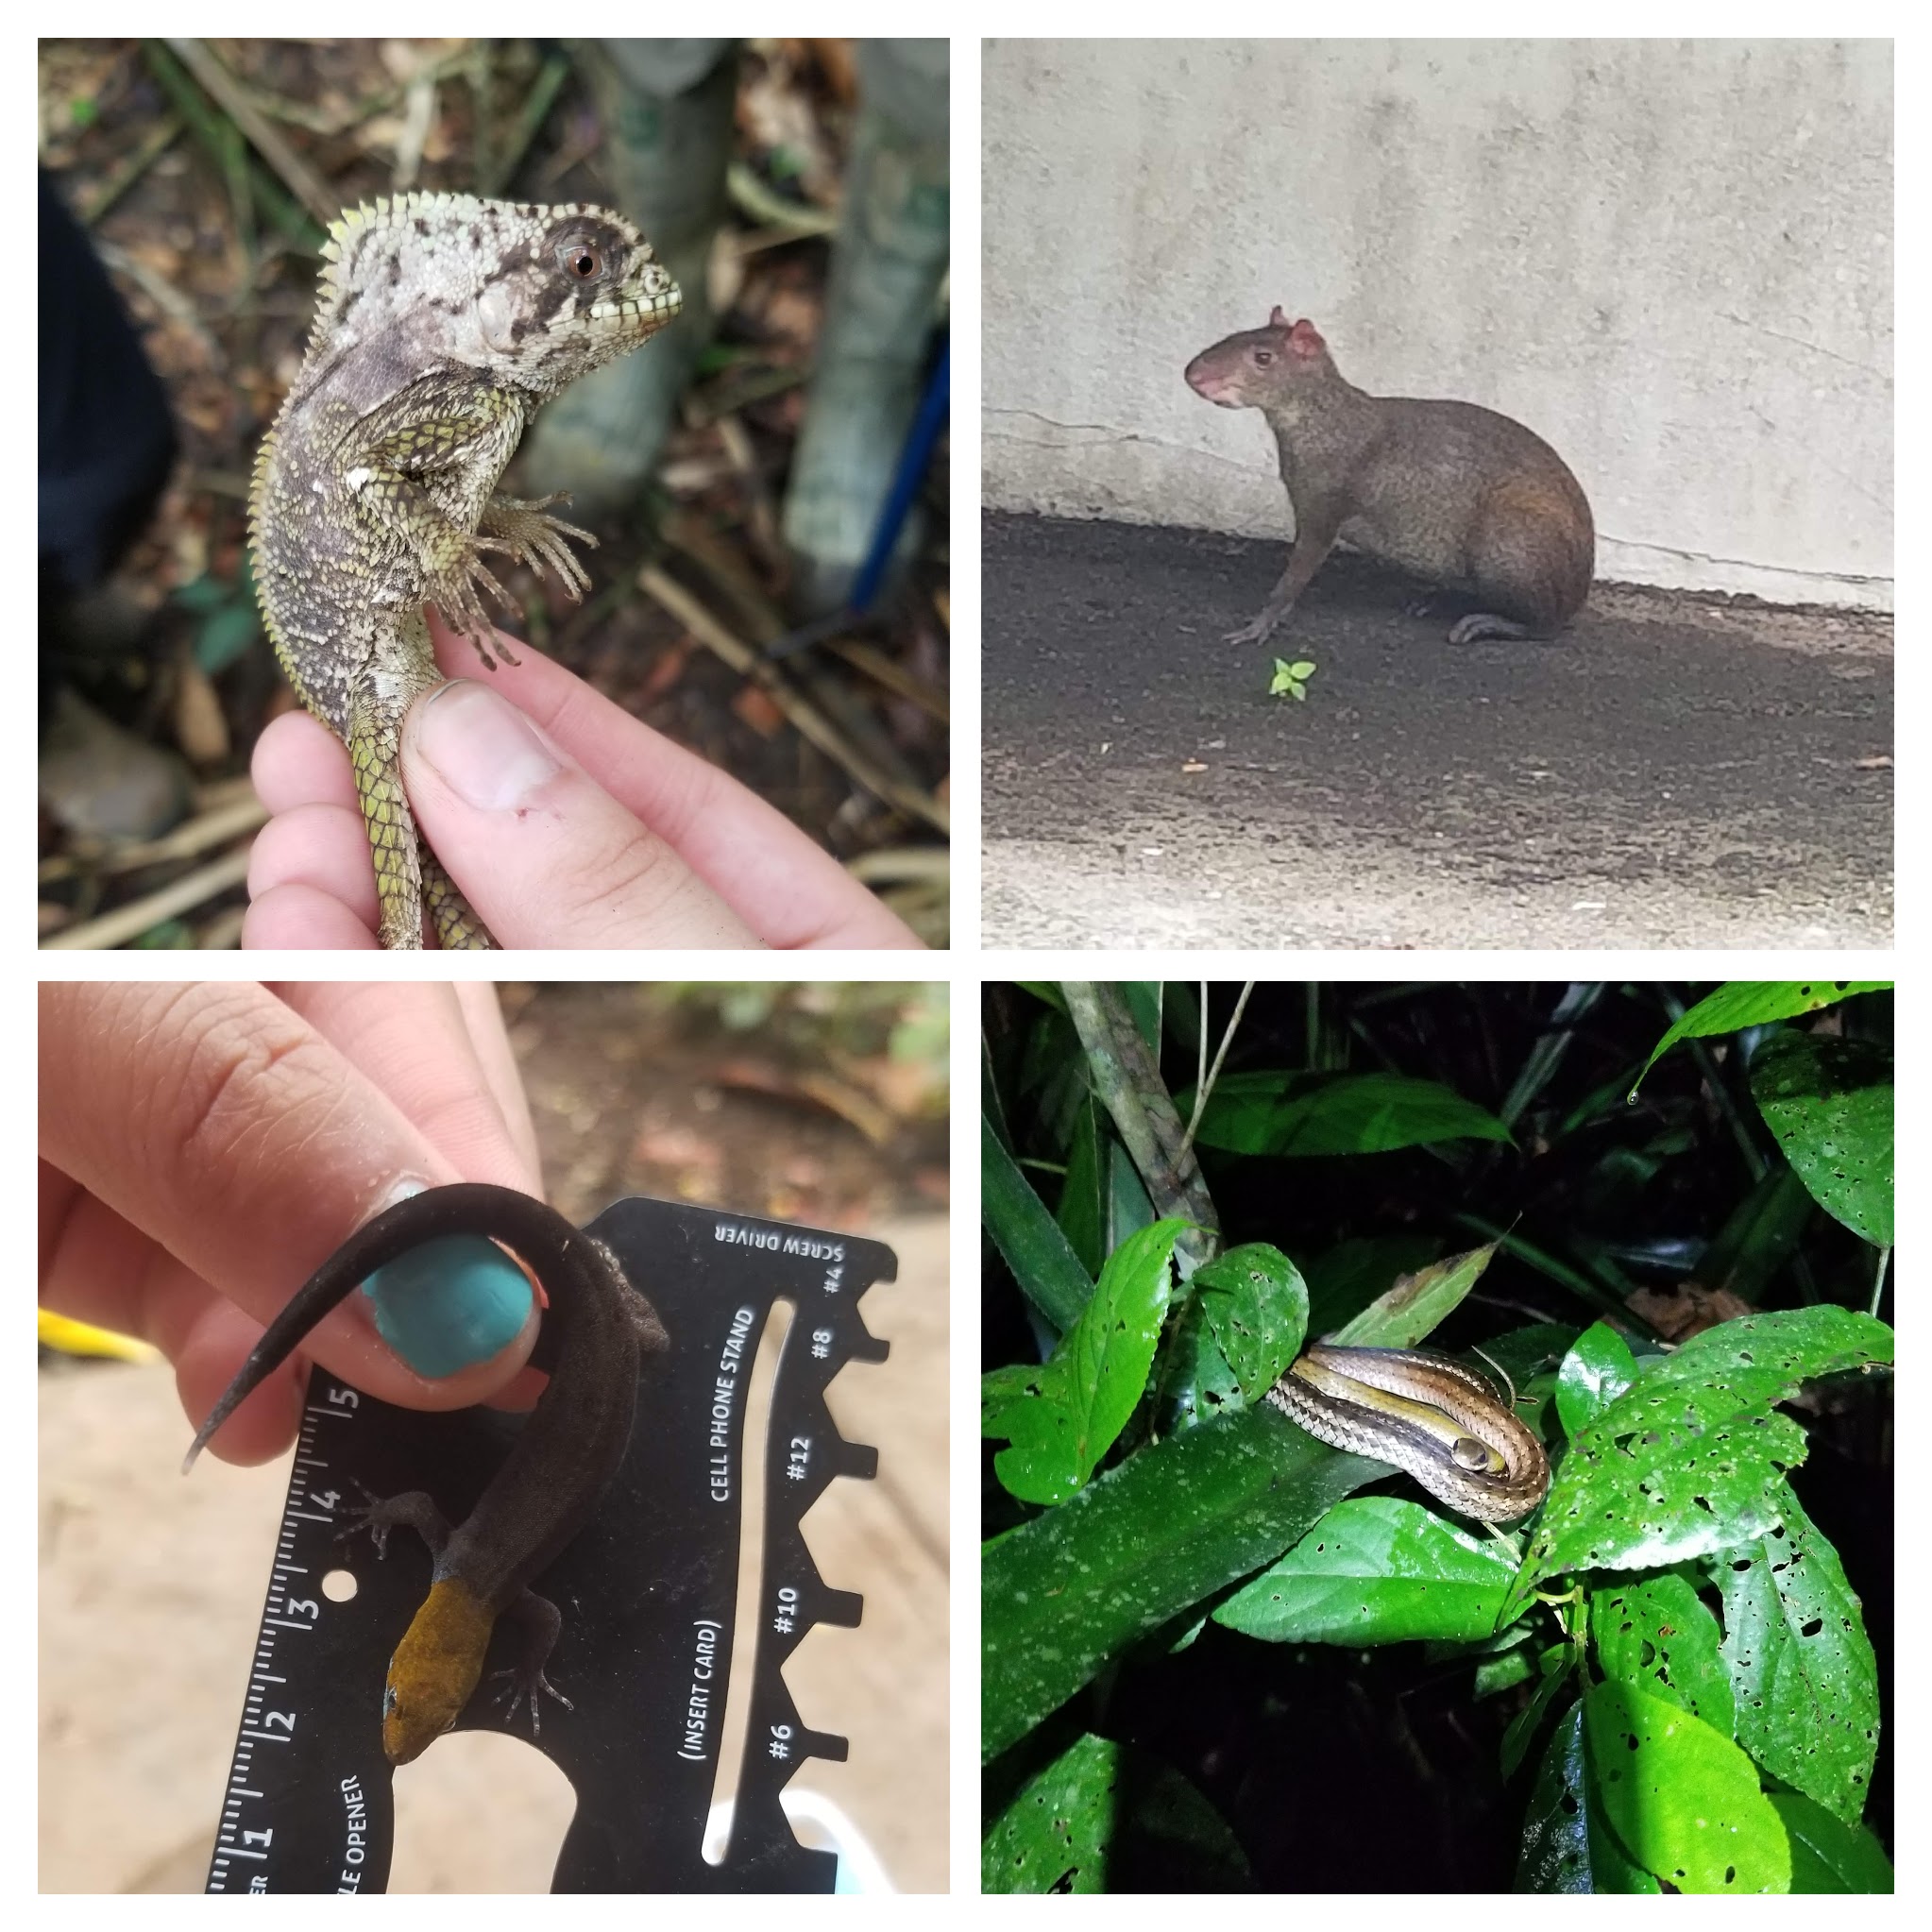 From left to right, _Corytophanes cristatus_, an agouti, _Gonatodes albigularis_, and an unidentified colubrid snake which may possibly be _Mastigodryas alternatus_.